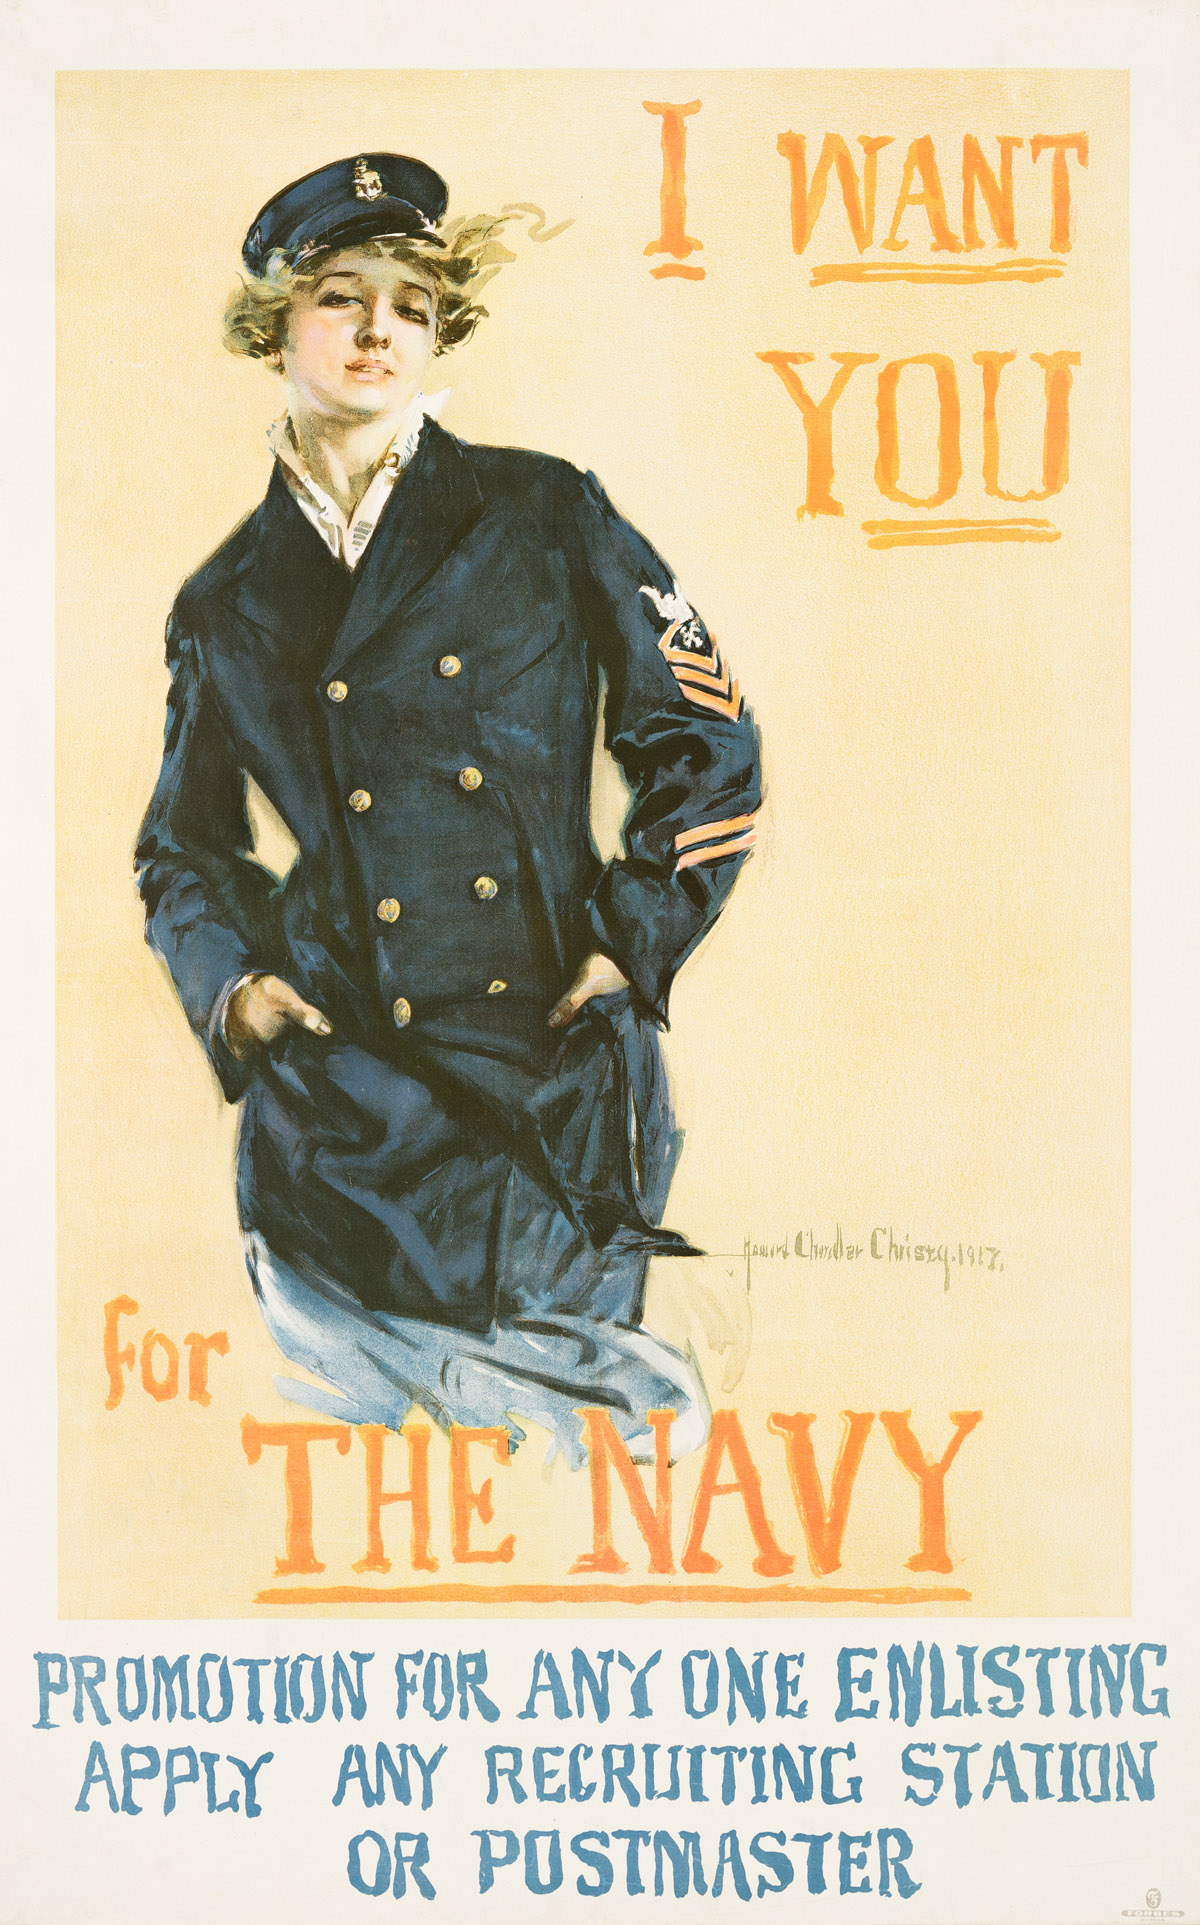 HOWARD CHANDLER CHRISTY (1872-1952).  I WANT YOU FOR THE NAVY. 1917. 40¾x26 inches, 103½x66 cm. Forbes, Boston.